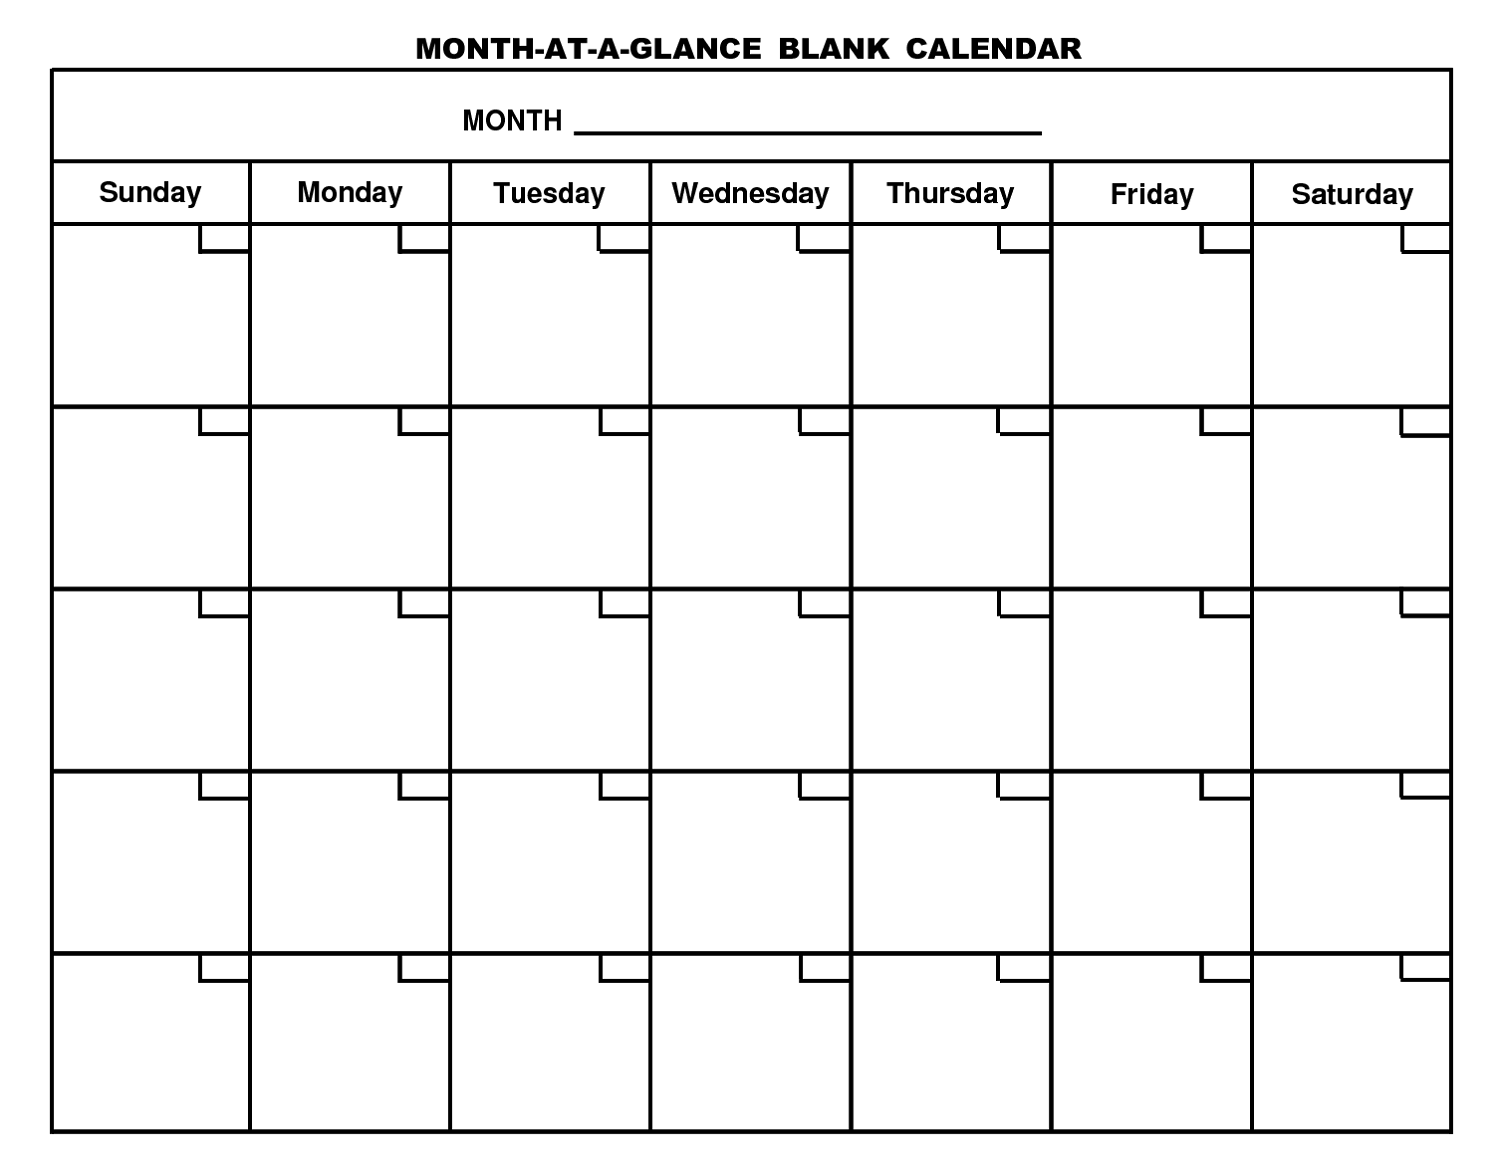 Sample Calendars to Print Activity Shelter